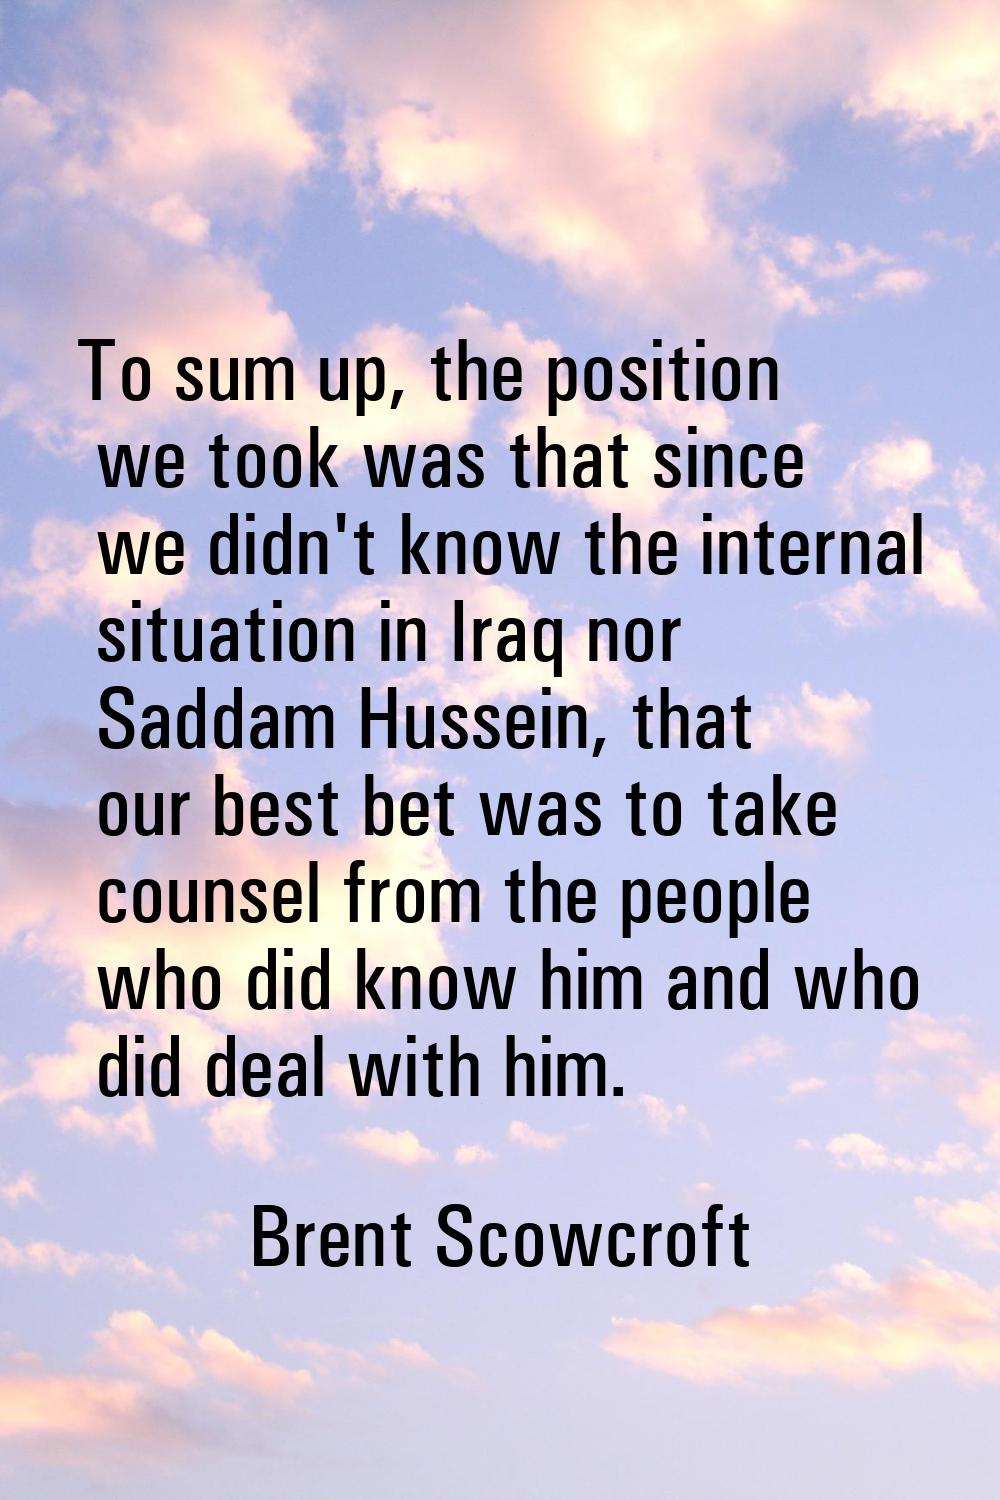 To sum up, the position we took was that since we didn't know the internal situation in Iraq nor Sa